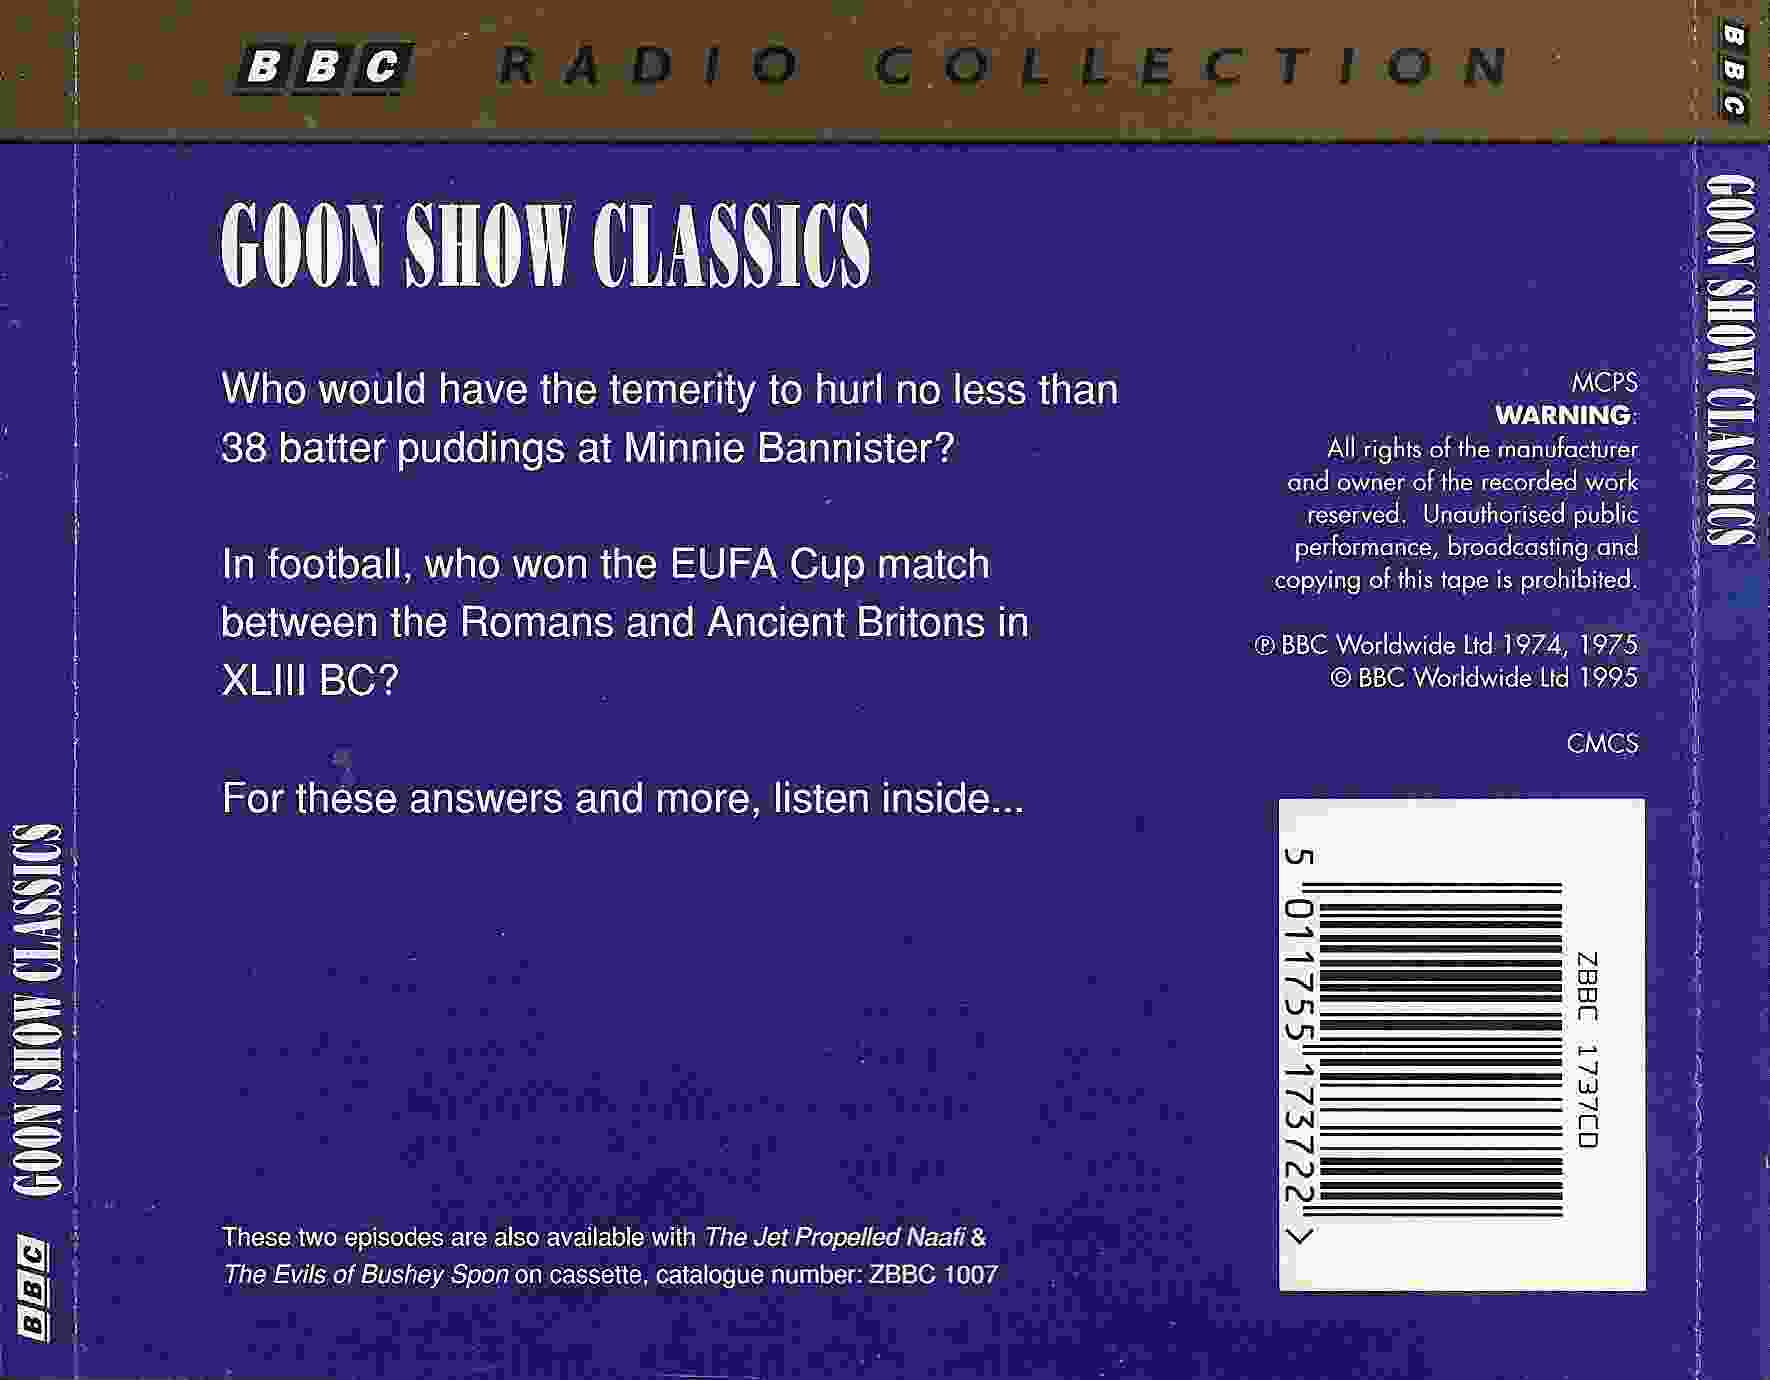 Picture of ZBBC 1737 CD Goon show classics by artist Spike Milligan / Larry Stephens from the BBC records and Tapes library